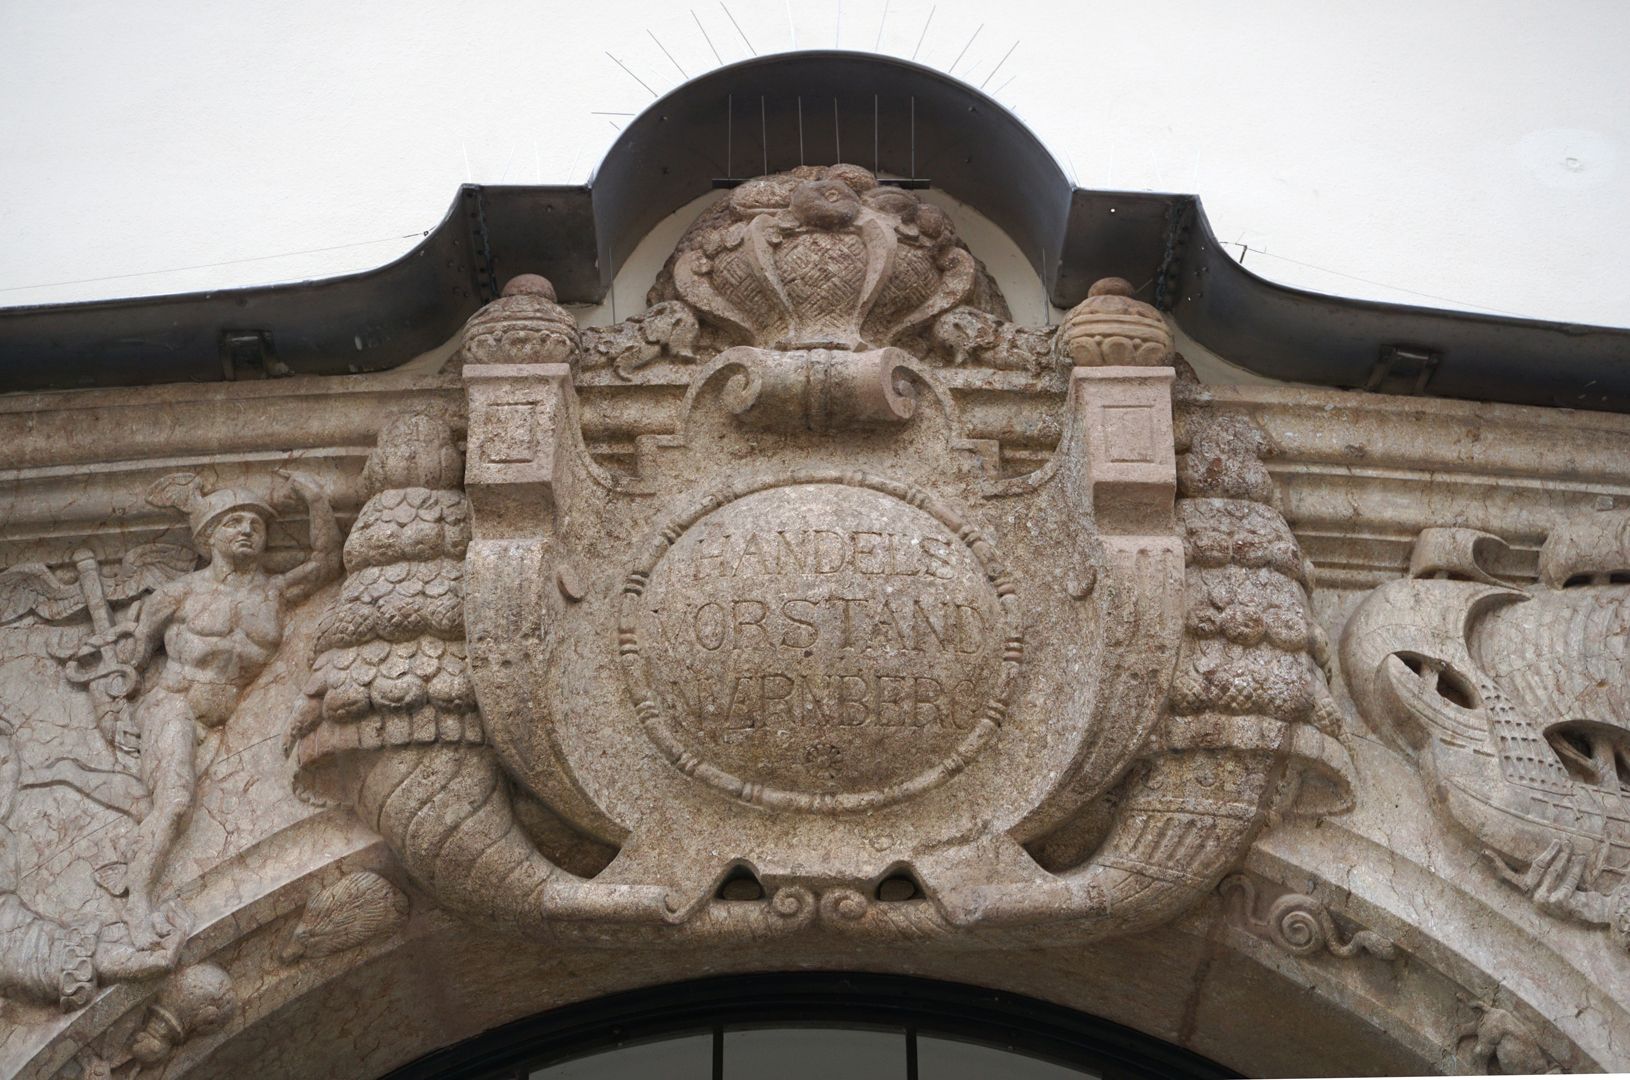 Portal cartouche above the archway, framed by cornucopias